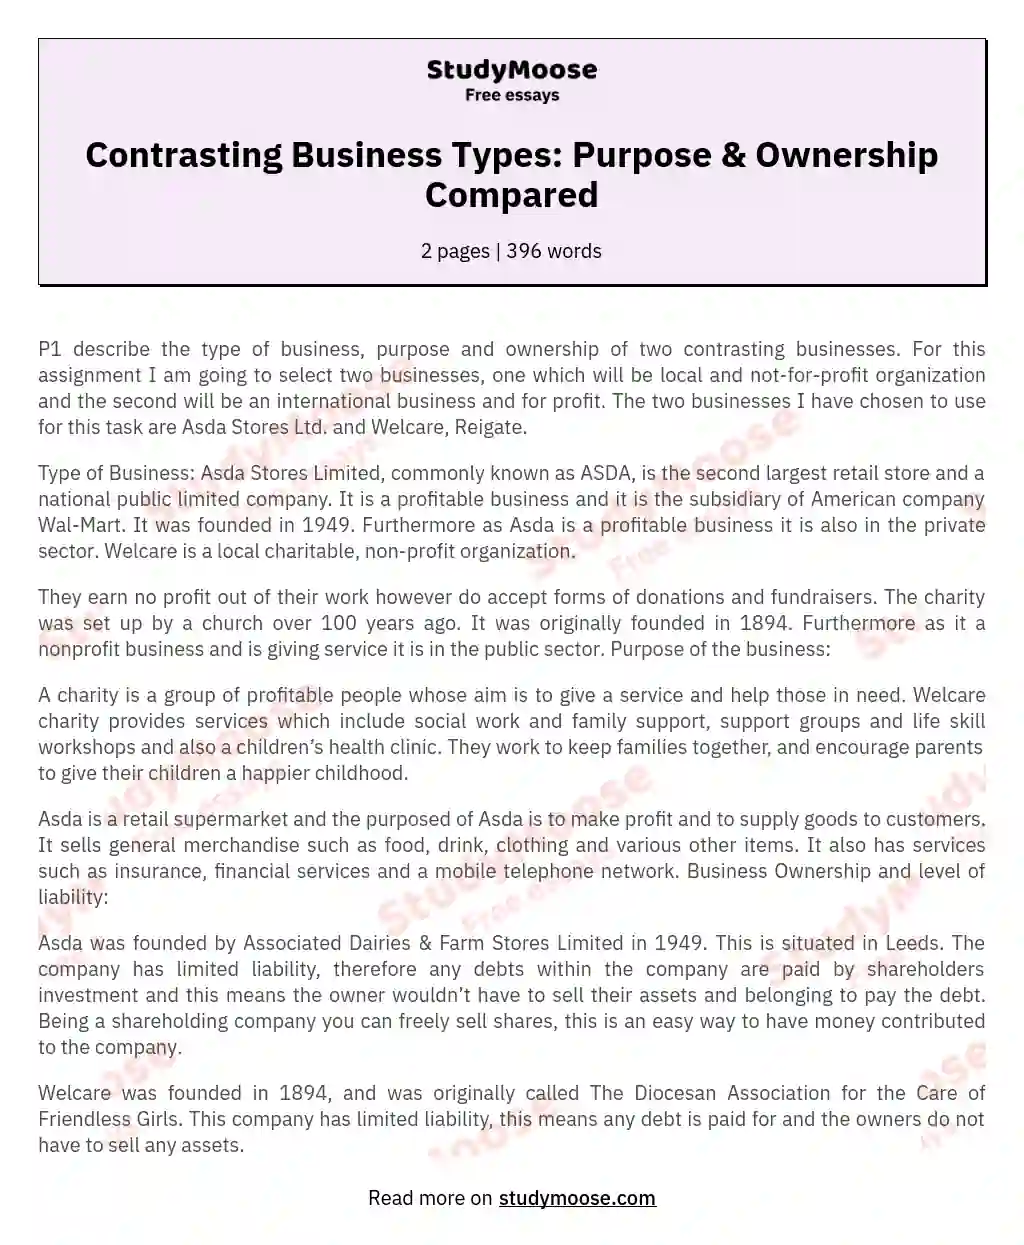 Contrasting Business Types: Purpose & Ownership Compared essay